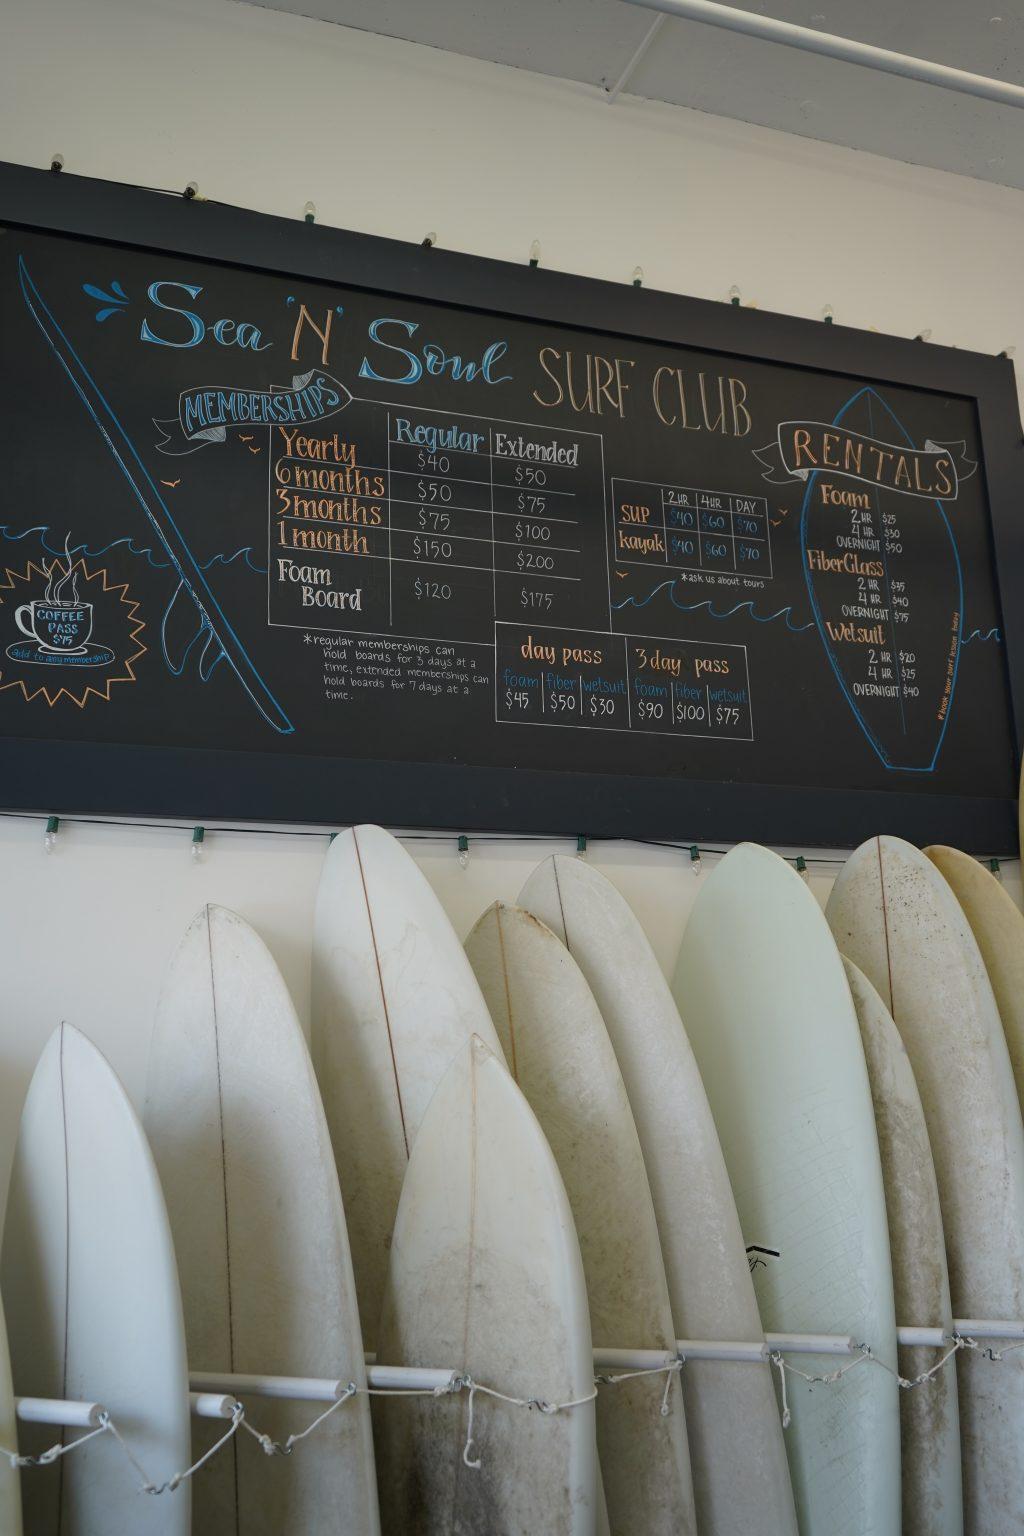 Half of Sea n Soul features wetsuits and surfboards that are available for rent March 17, while the other half holds merchandise for sale and the coffee bar. Liakos said the producers picked out specific wetsuits and boards that would be aesthetically pleasing on camera. Photo by Liam Zieg